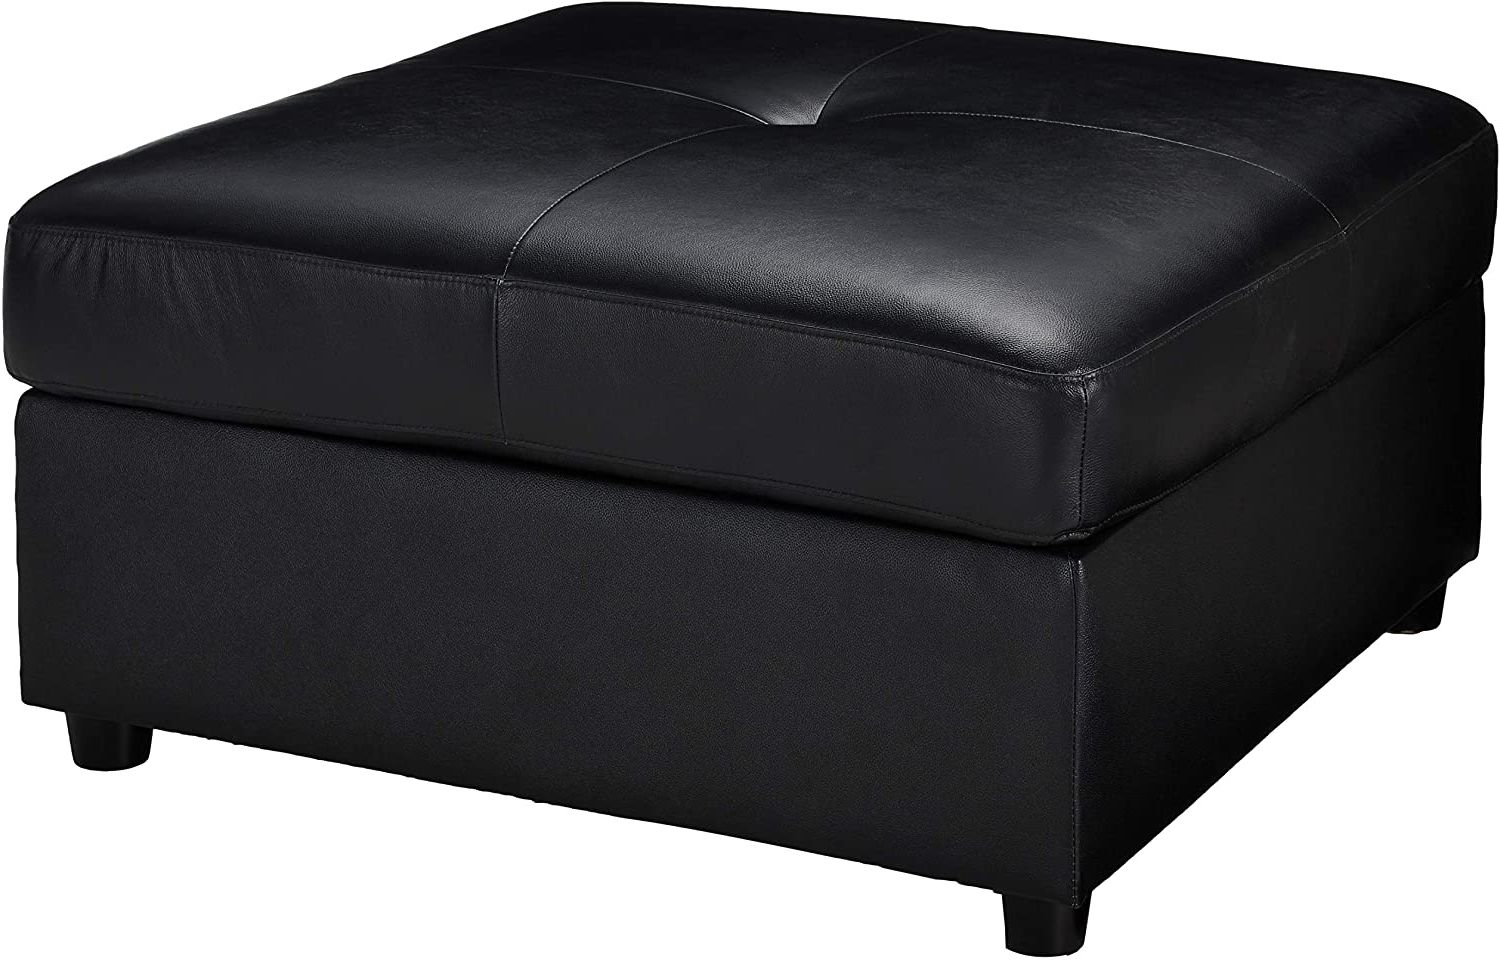 Amazon: Christopher Knight Home Finney Top Grain Leather Ottoman With Regard To Most Popular Black Leather Ottomans (View 2 of 10)